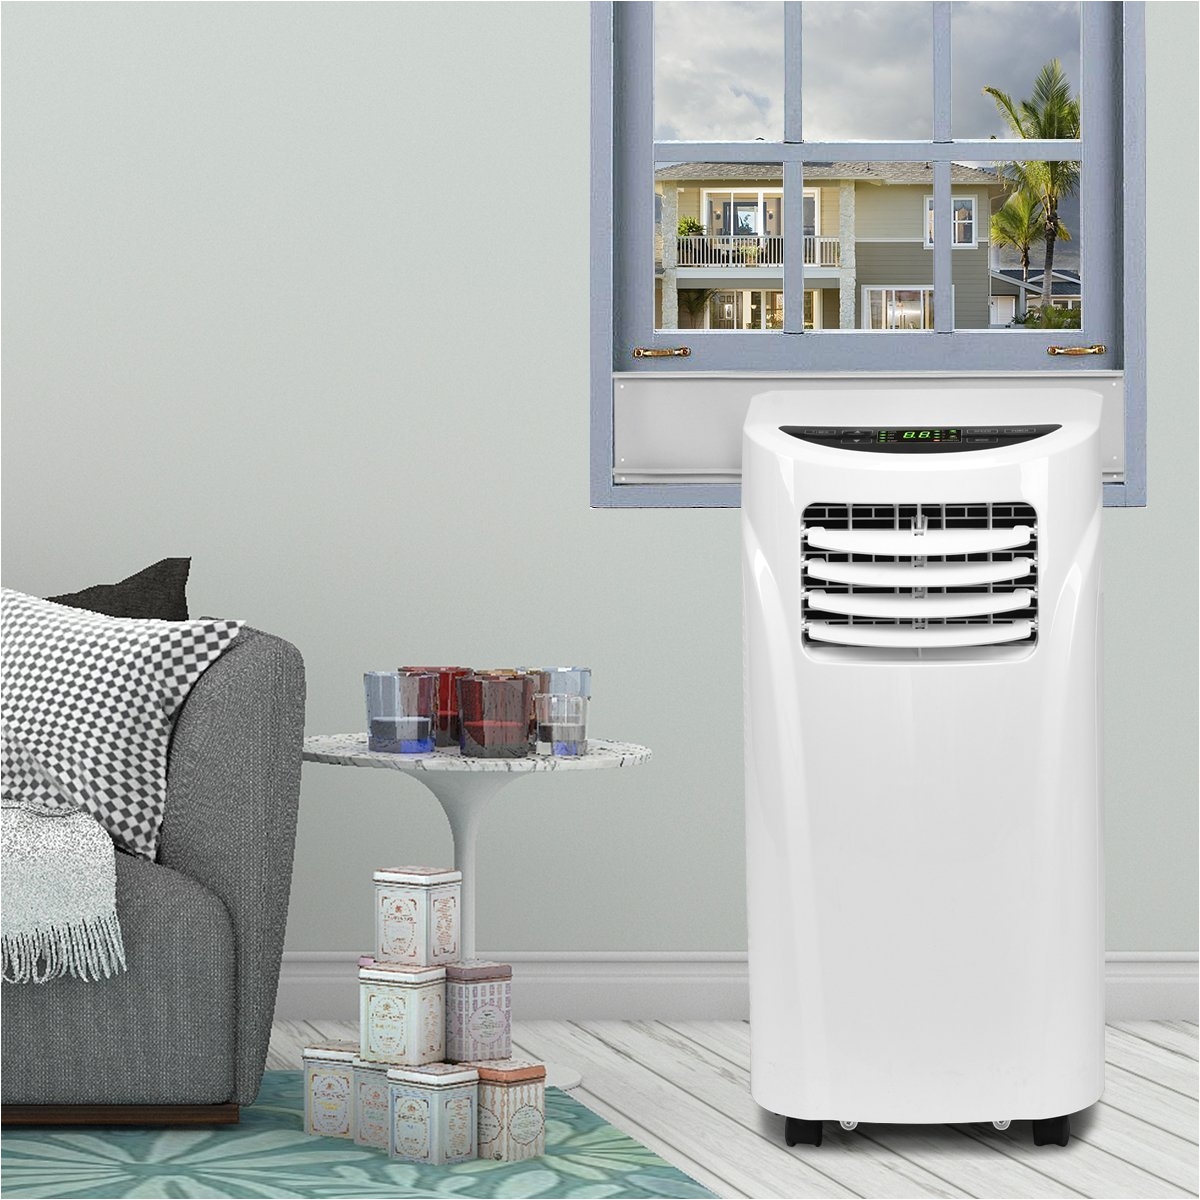 amazon com costway 10 000 btu portable air conditioner with remote control dehumidifier function window wall mount white home kitchen